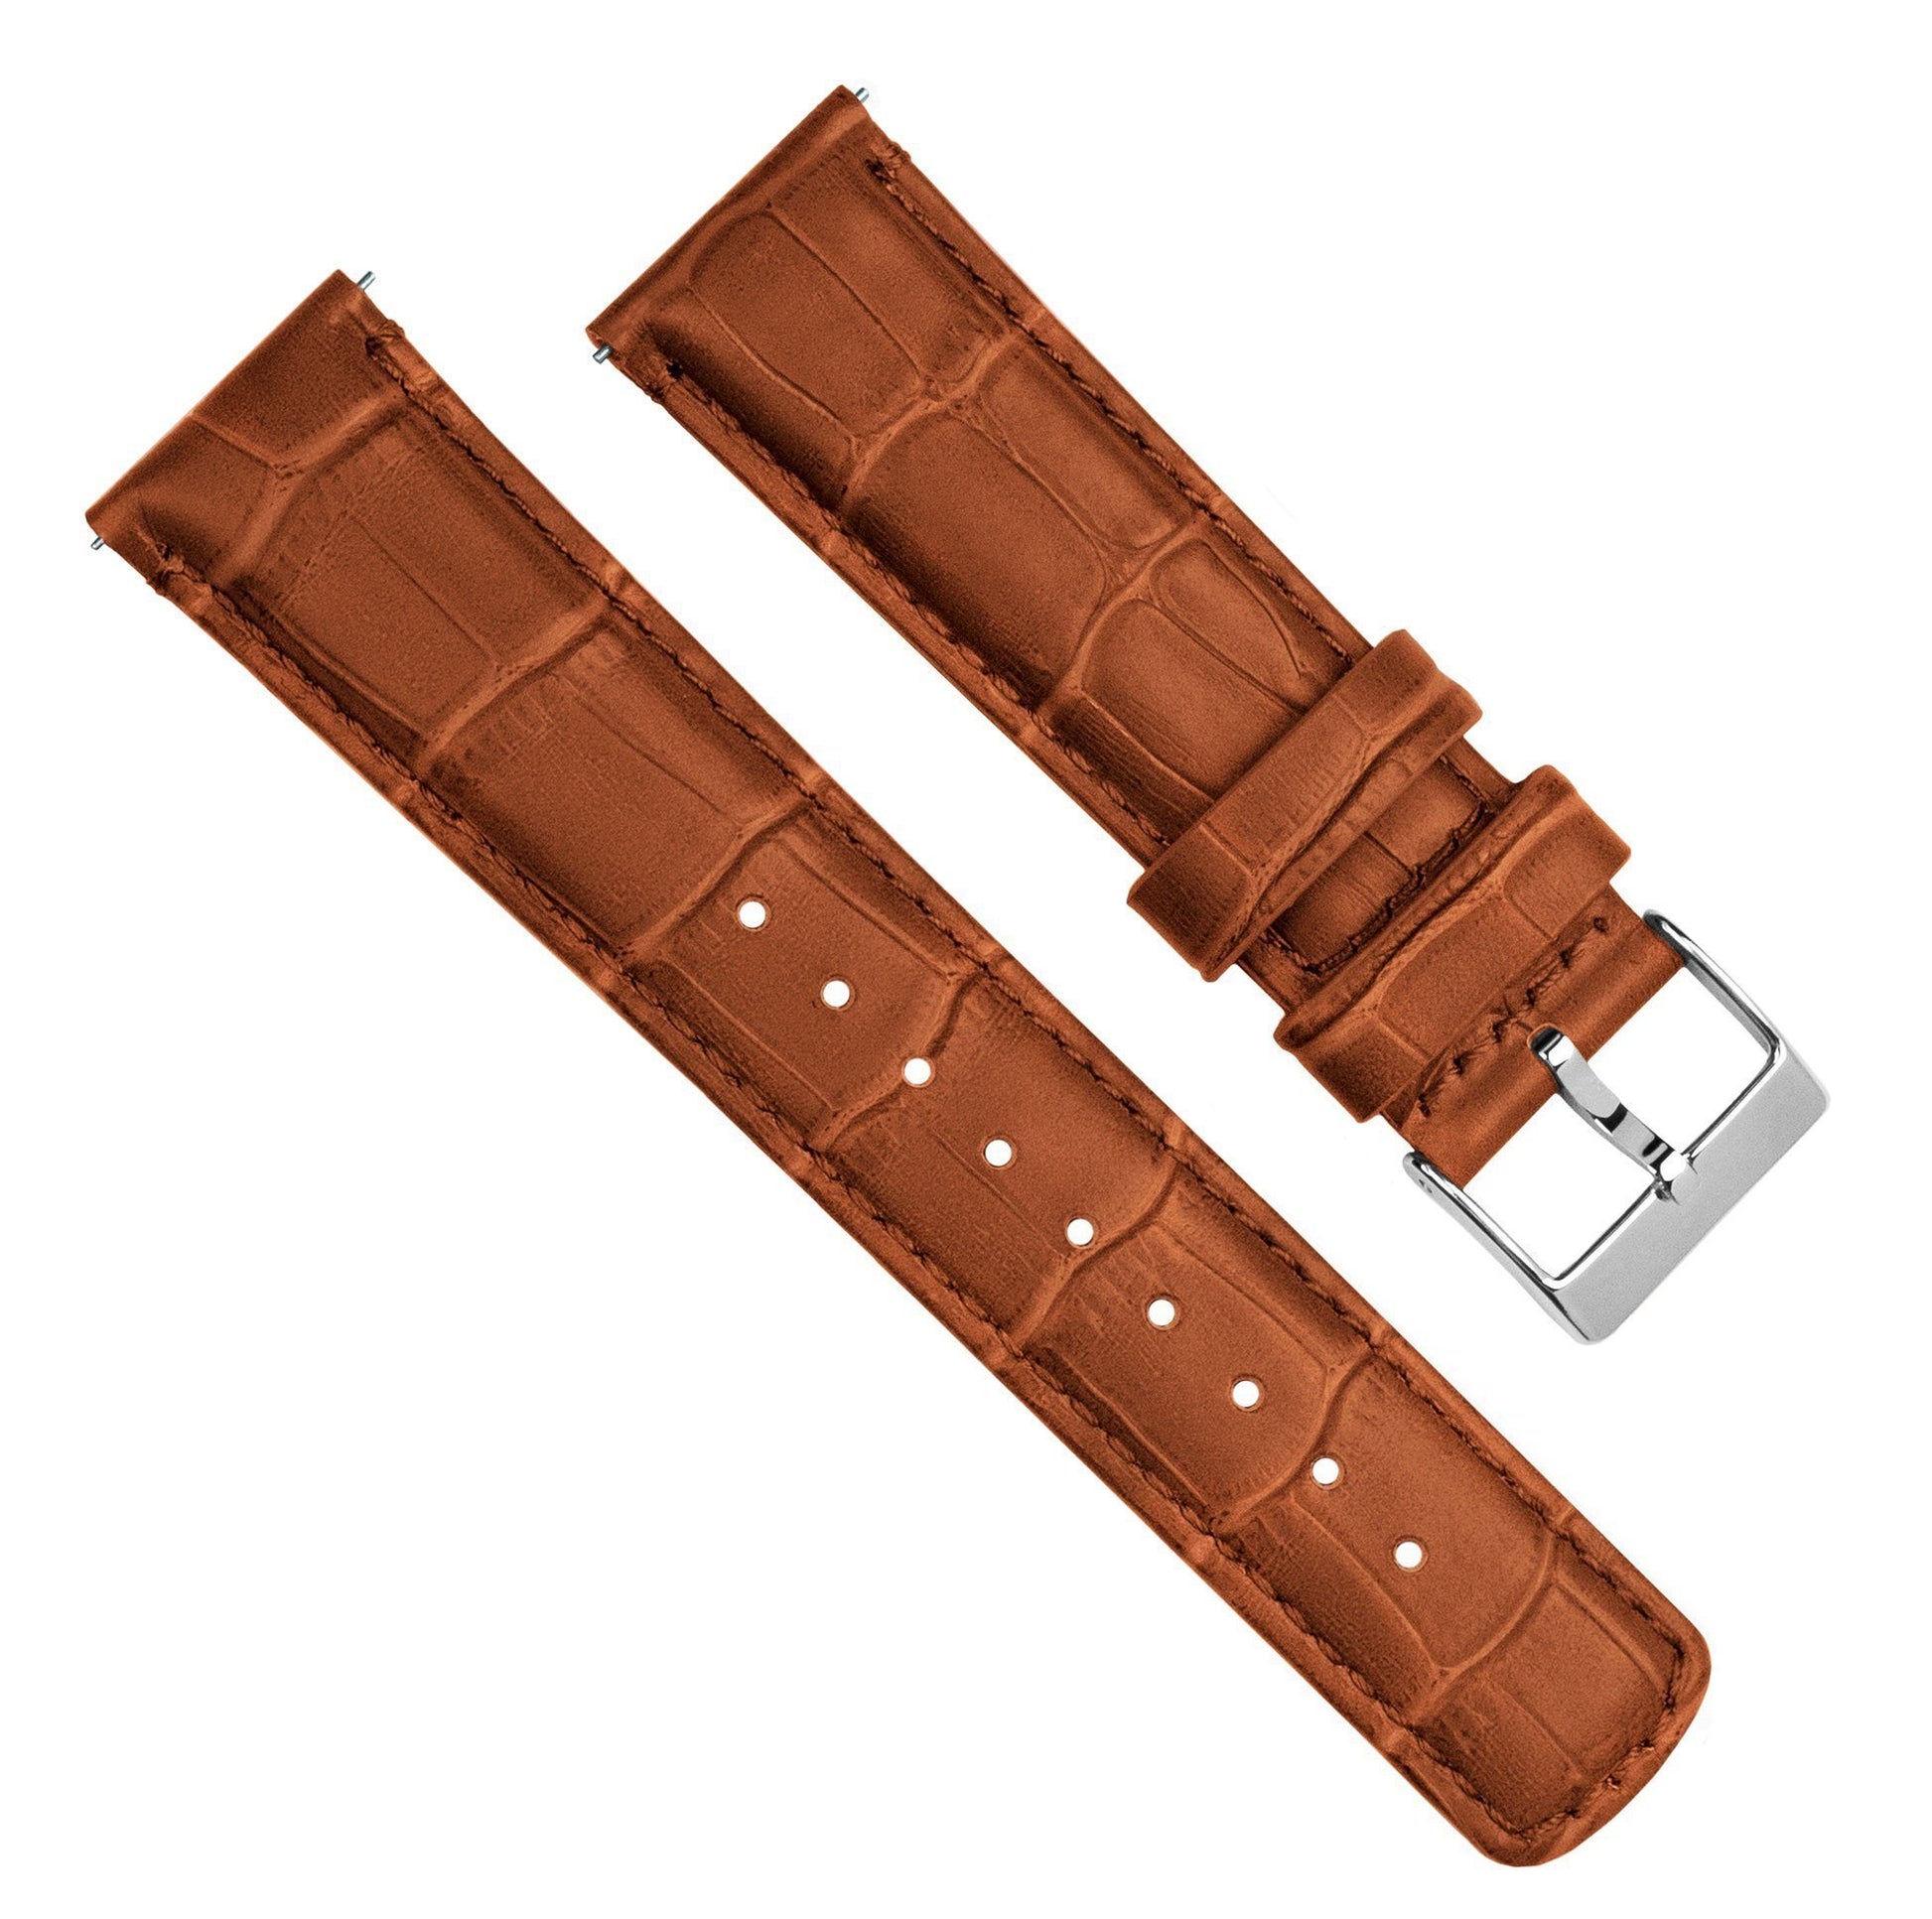 Withings Nokia Activité and Steel HR | Toffee Brown Alligator Grain Leather - Barton Watch Bands